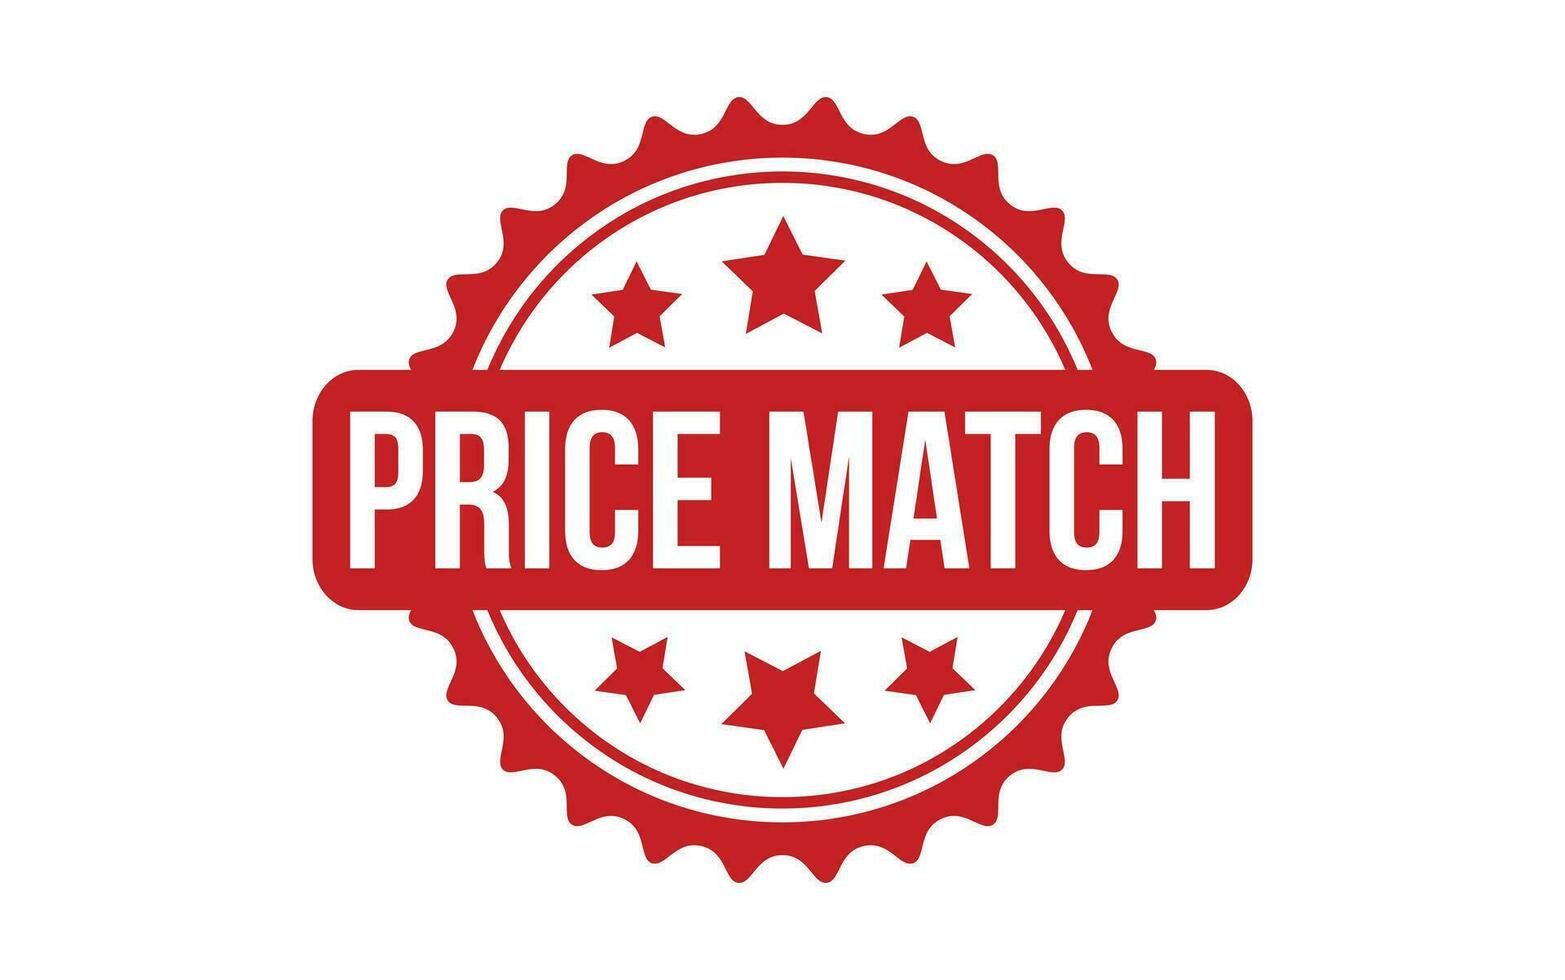 Price Match rubber grunge stamp seal vector